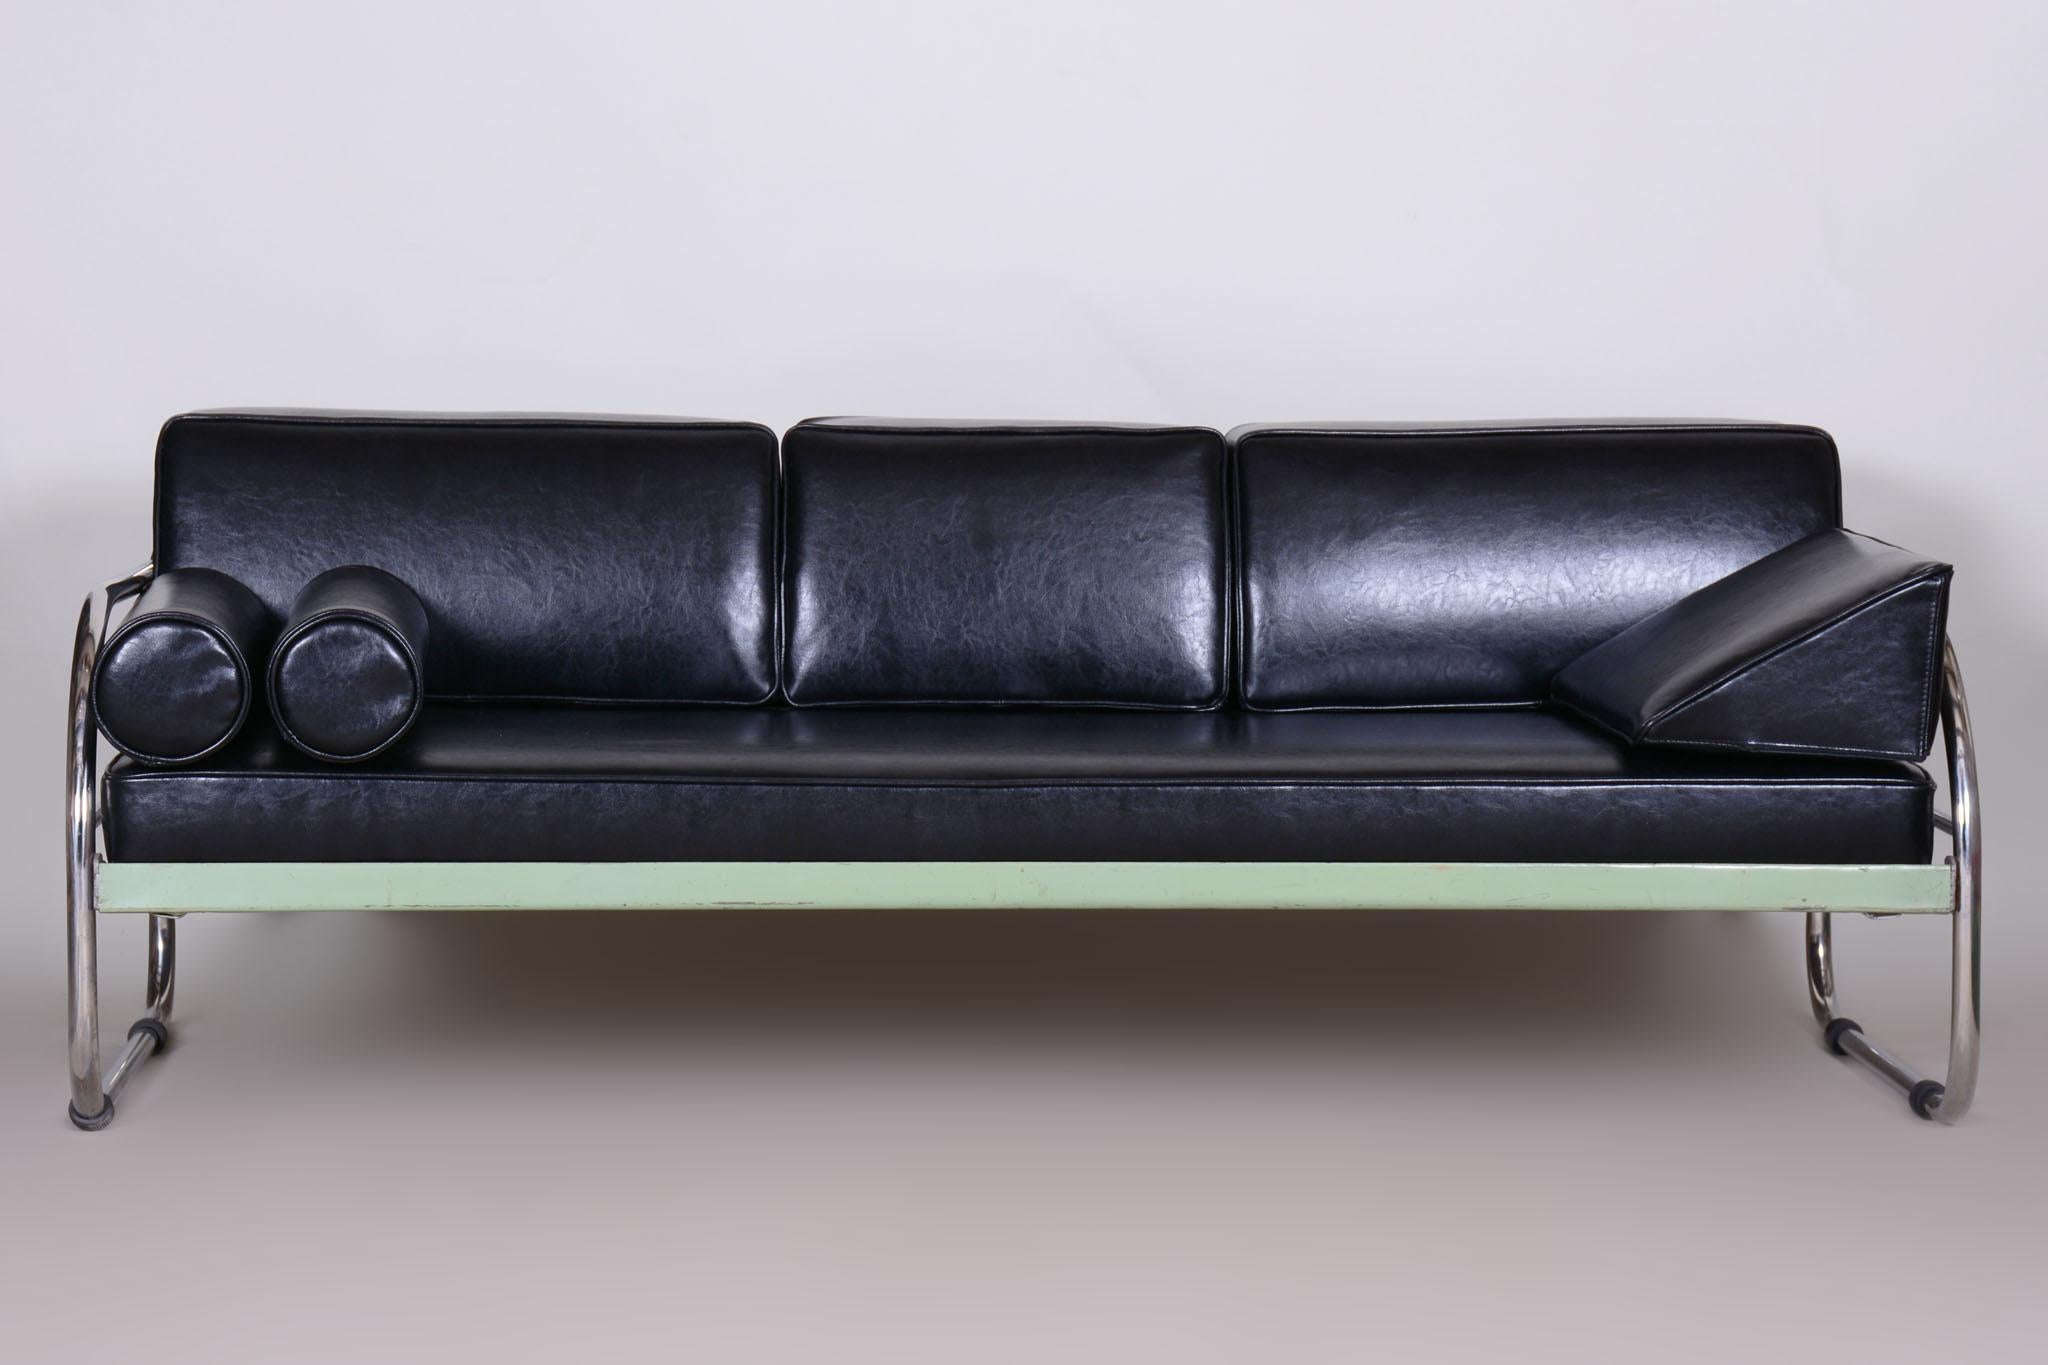 Restored black Bauhaus sofa by Robert Slezak.

Source: Czechia (Czechoslovakia)
Period: 1930-1939
Number of Seats: 3
Material: Chrome-plated steel, high-quality leather

Designed by renowned Czech designer Robert Slezak. 

It has been fully